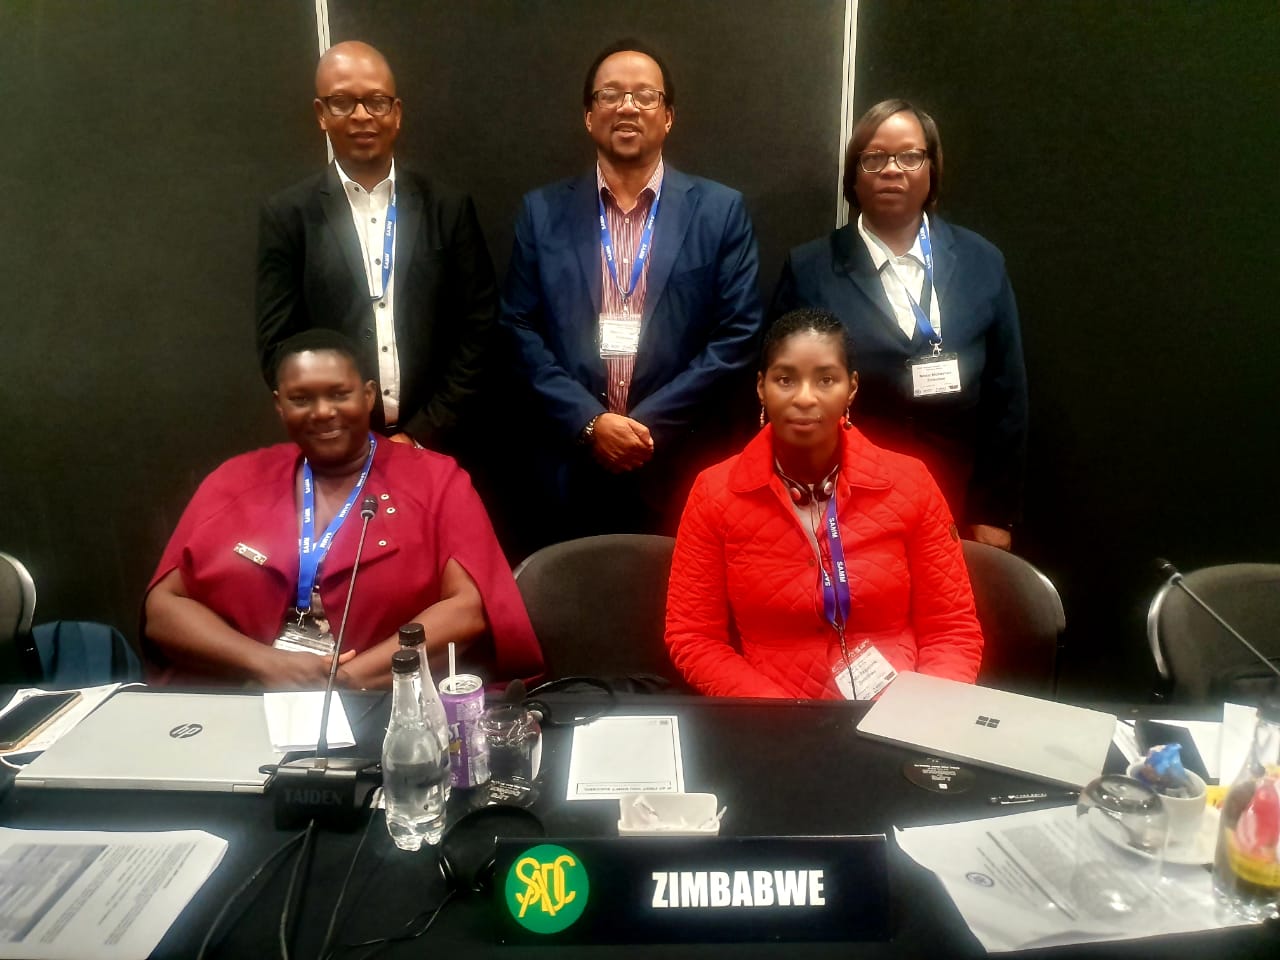 SADC Technical Committee meeting on Labour migration in SA with SPSF Chairperson Mrs Mukwehwa standing on the right.